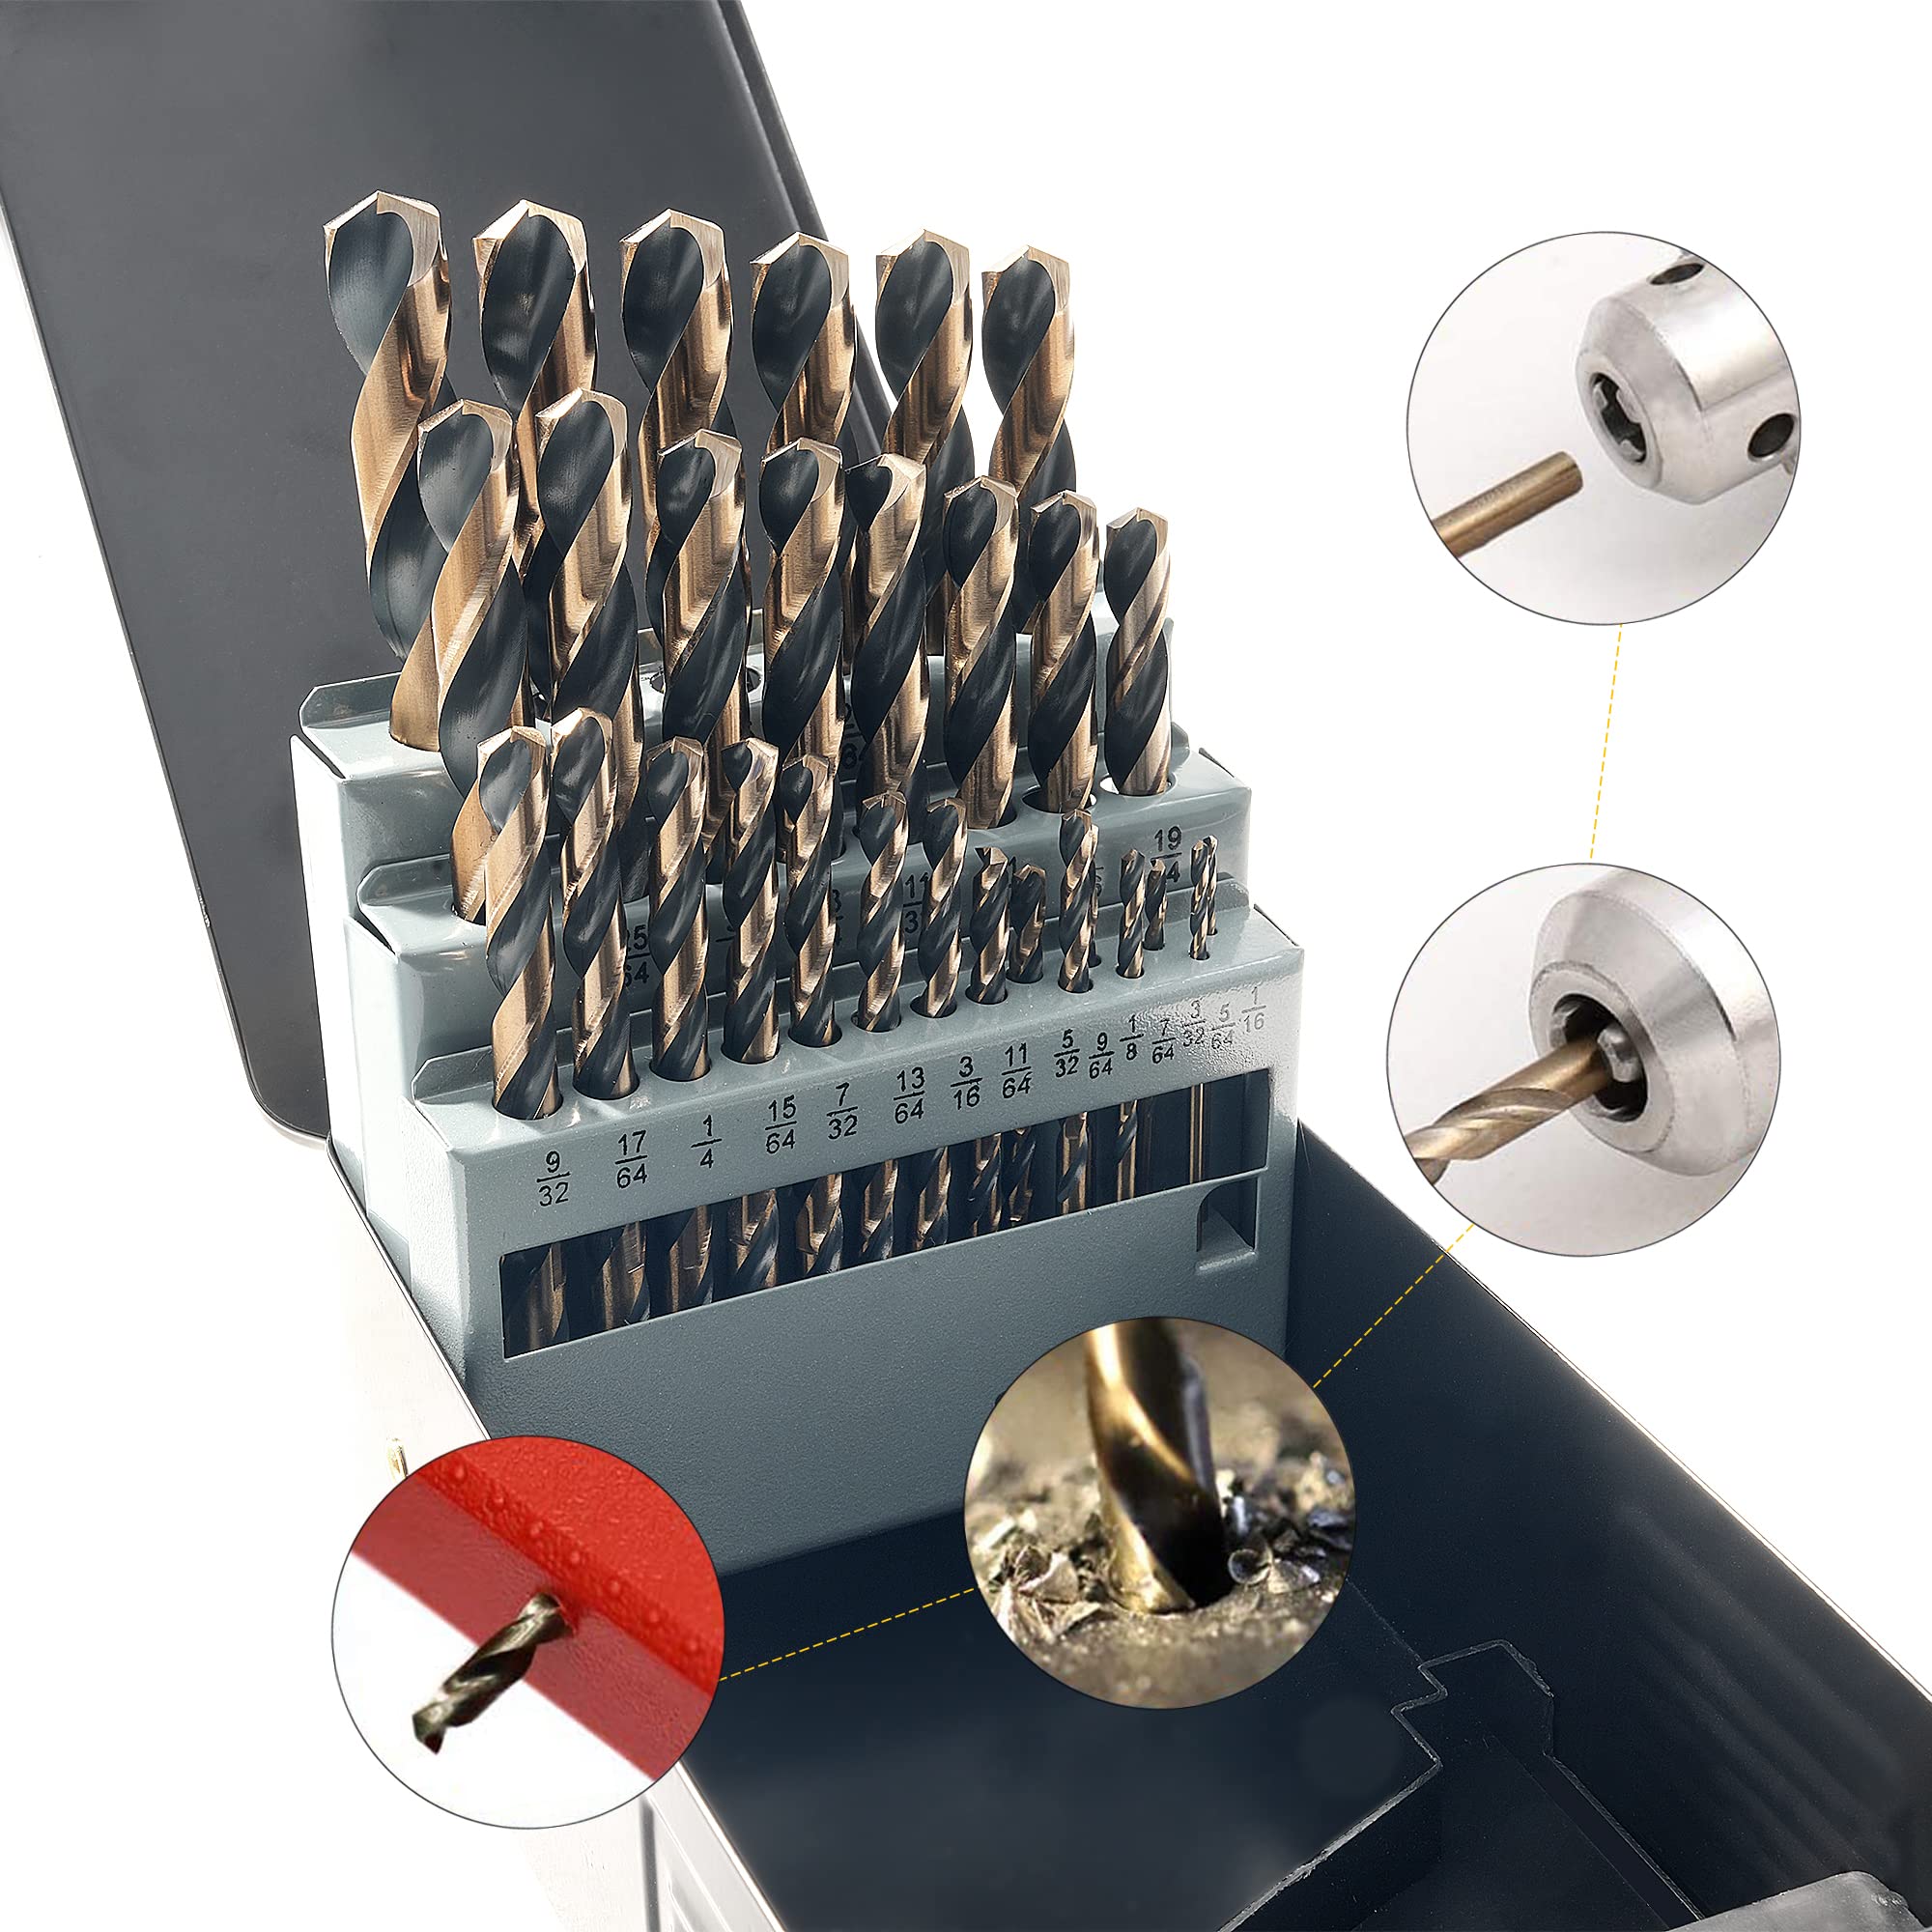 GMTOOLS 29Pcs Drill Bit Set, 135 Degree Tip High Speed Steel with Black and Gold Finish, Twist Jobber Length Drill Bit Kit for Hardened Metal, Cast Iron, Stainless Steel, Plastic and Wood with Metal Indexed Storage Case 1/16